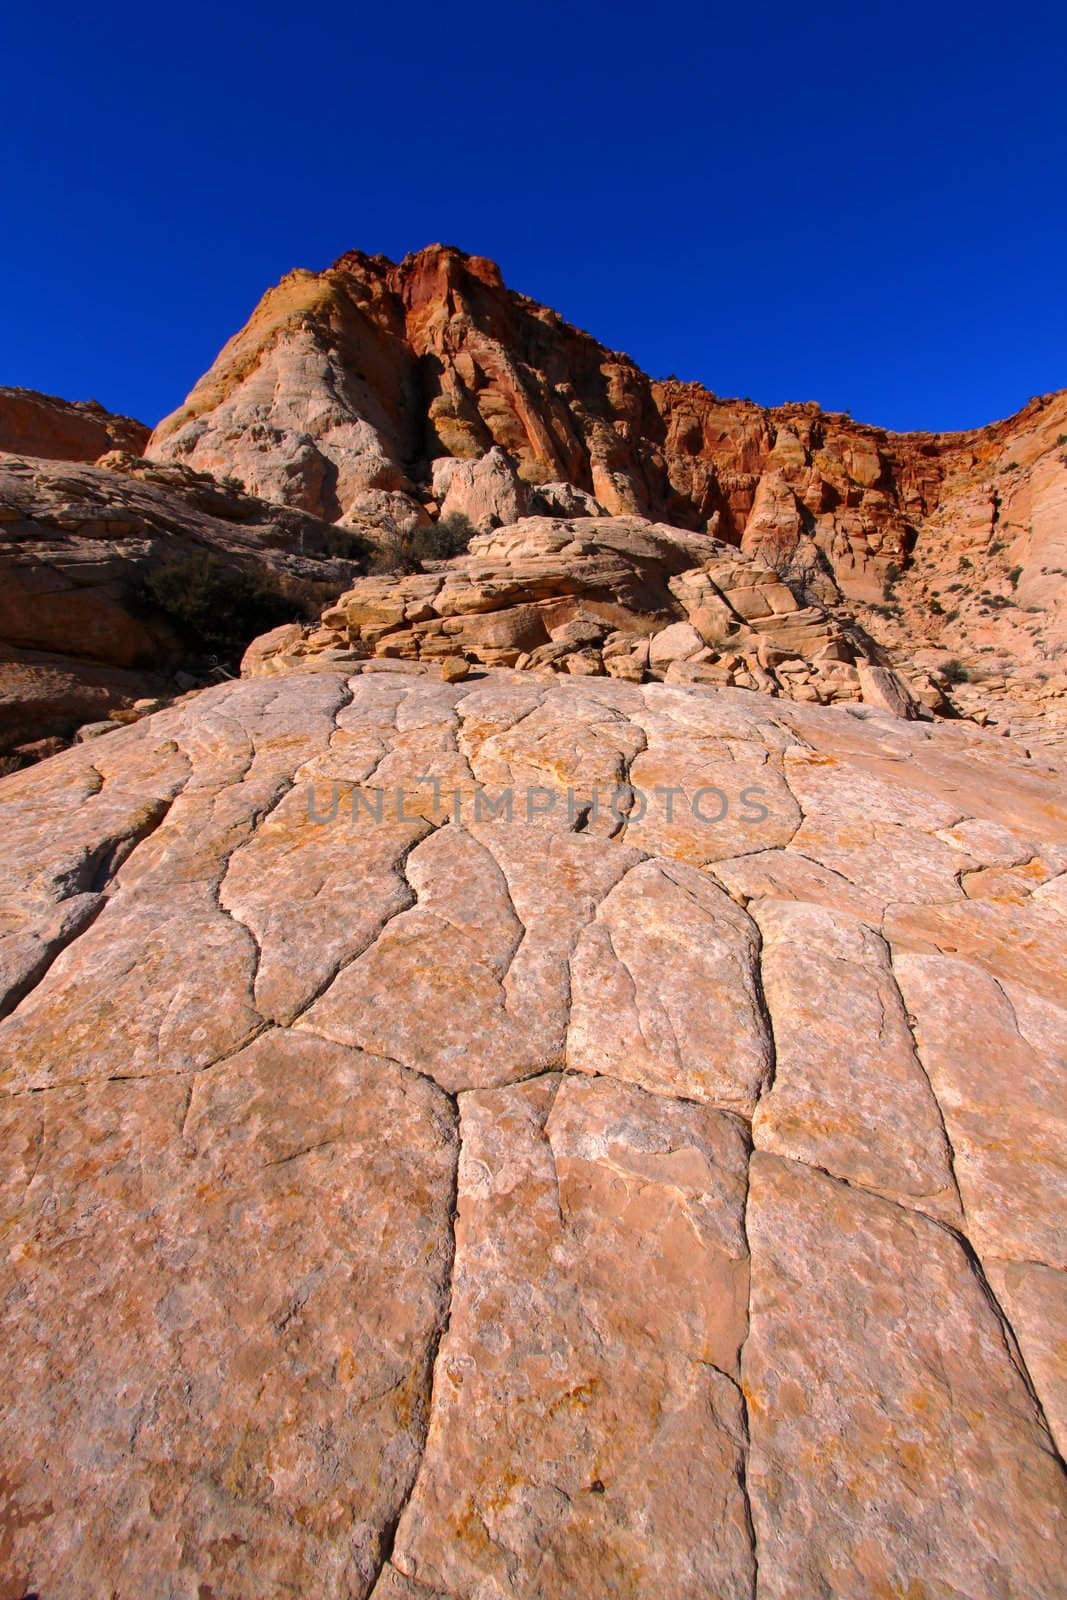 Textured rocky landscape at Capitol Reef National Park in Utah.